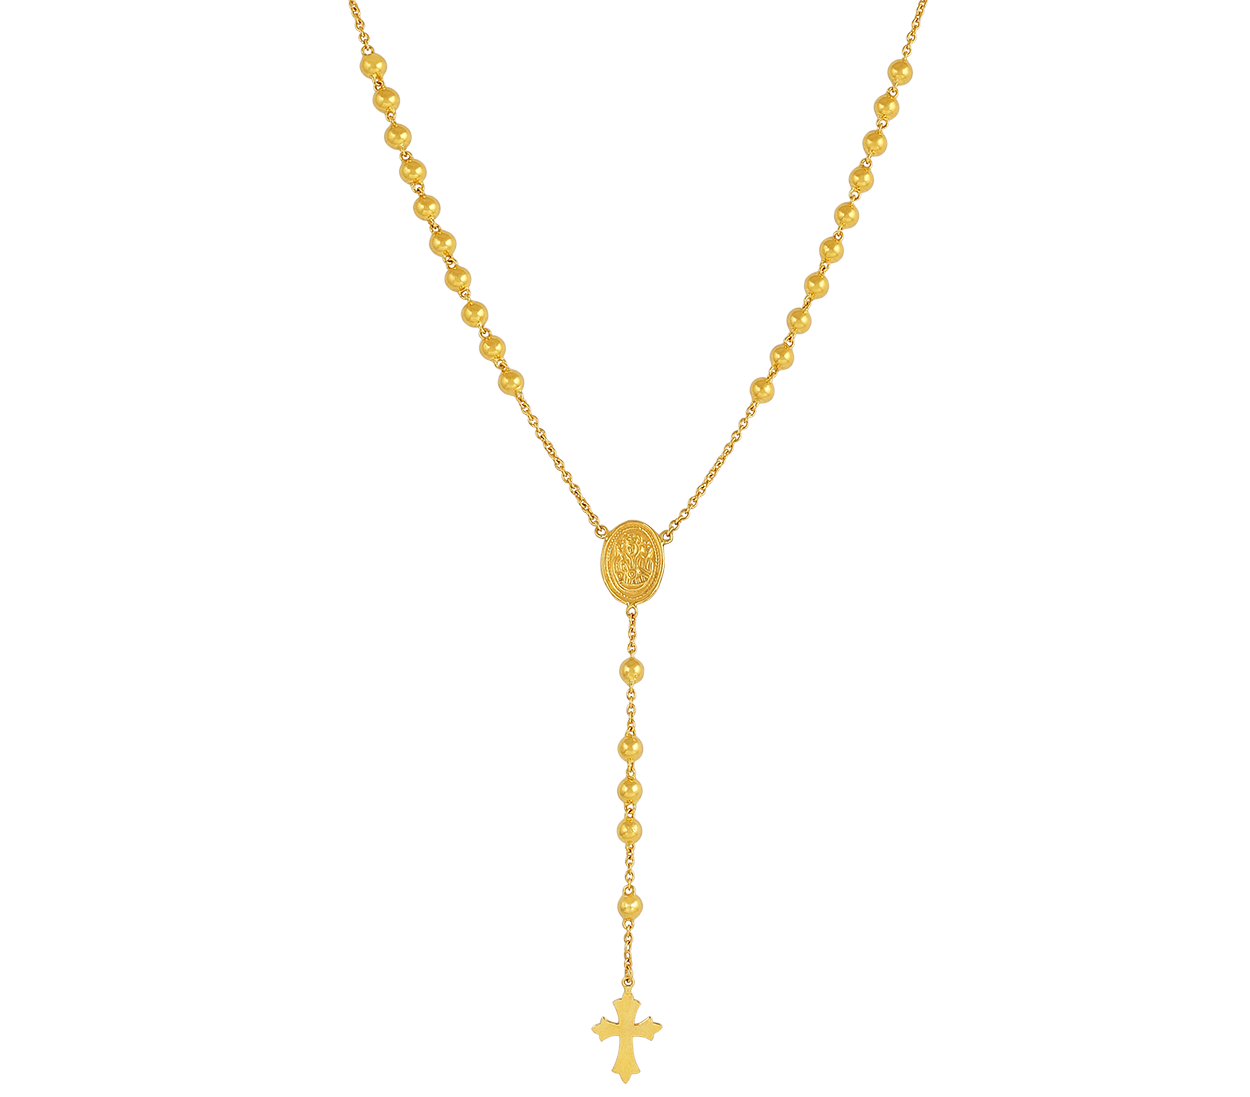 Stainless Steel Catholic Rosary Gold Rosary Beads Chain Necklace 6mm Long  Cross Design For Men And Women Perfect Christmas Gift From Senior_2020,  $8.6 | DHgate.Com